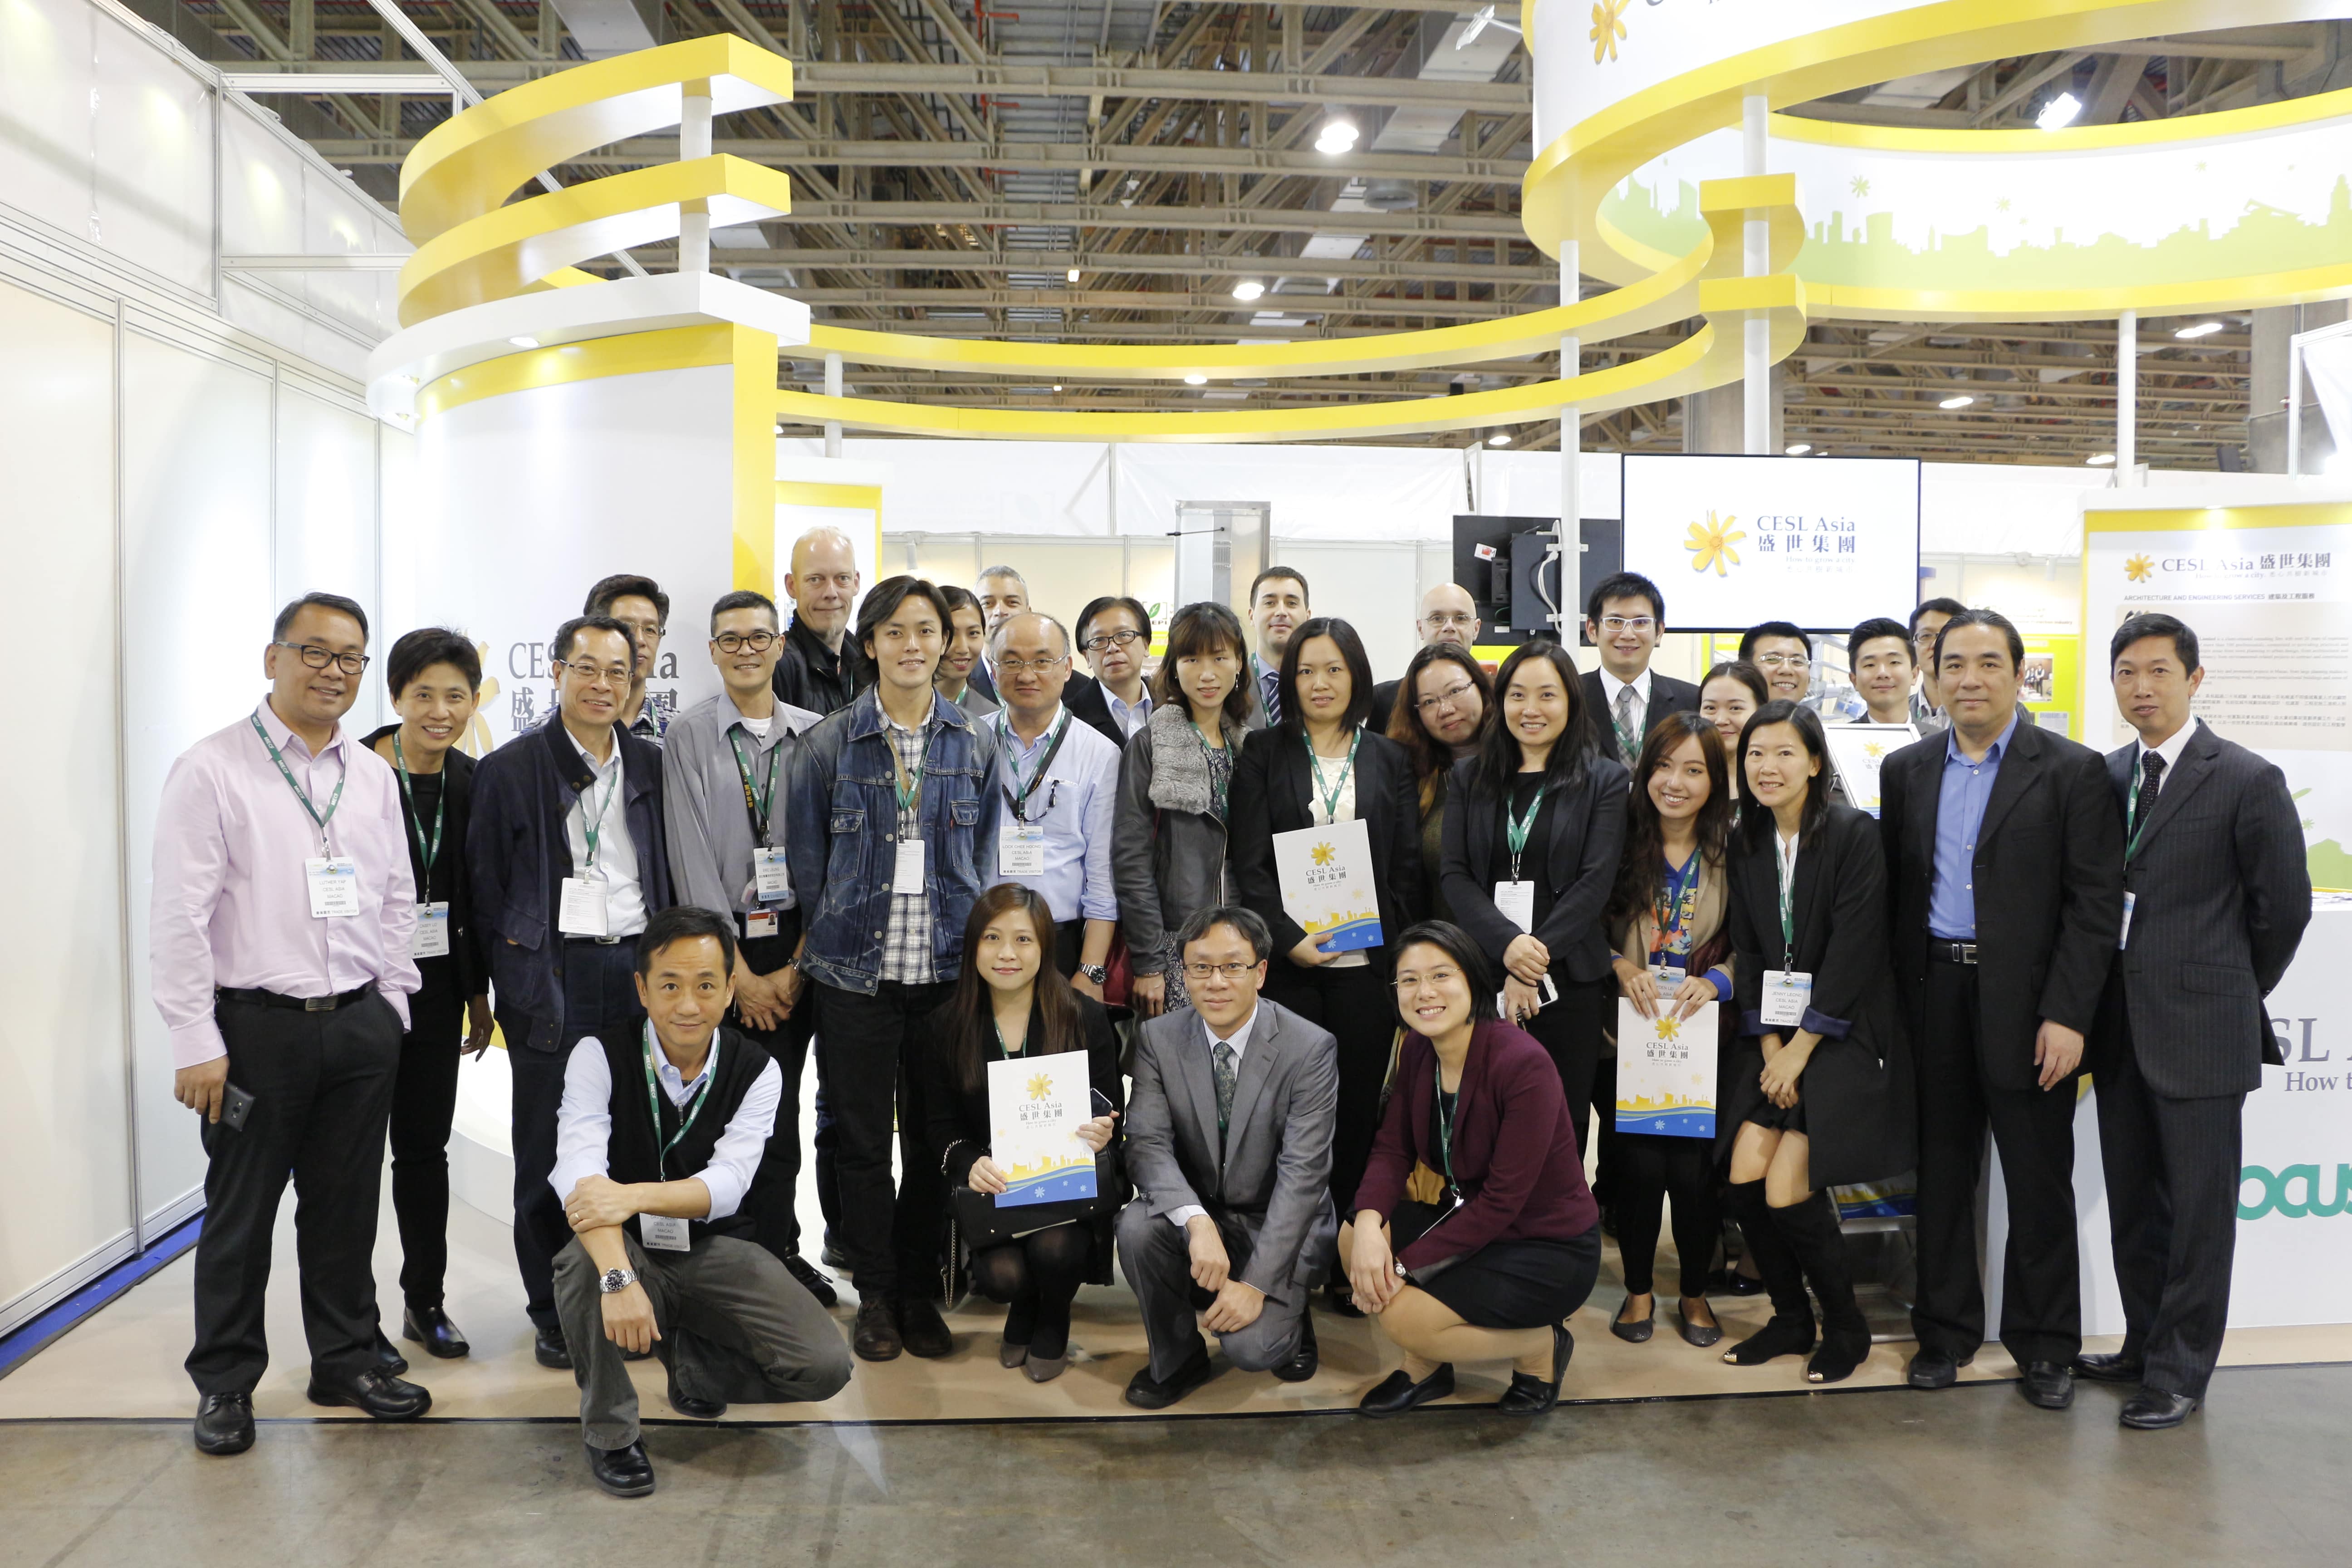 CESL Asia discloses new ventures at MIECF: industrial laundry in Macau and solar energy in Portugal